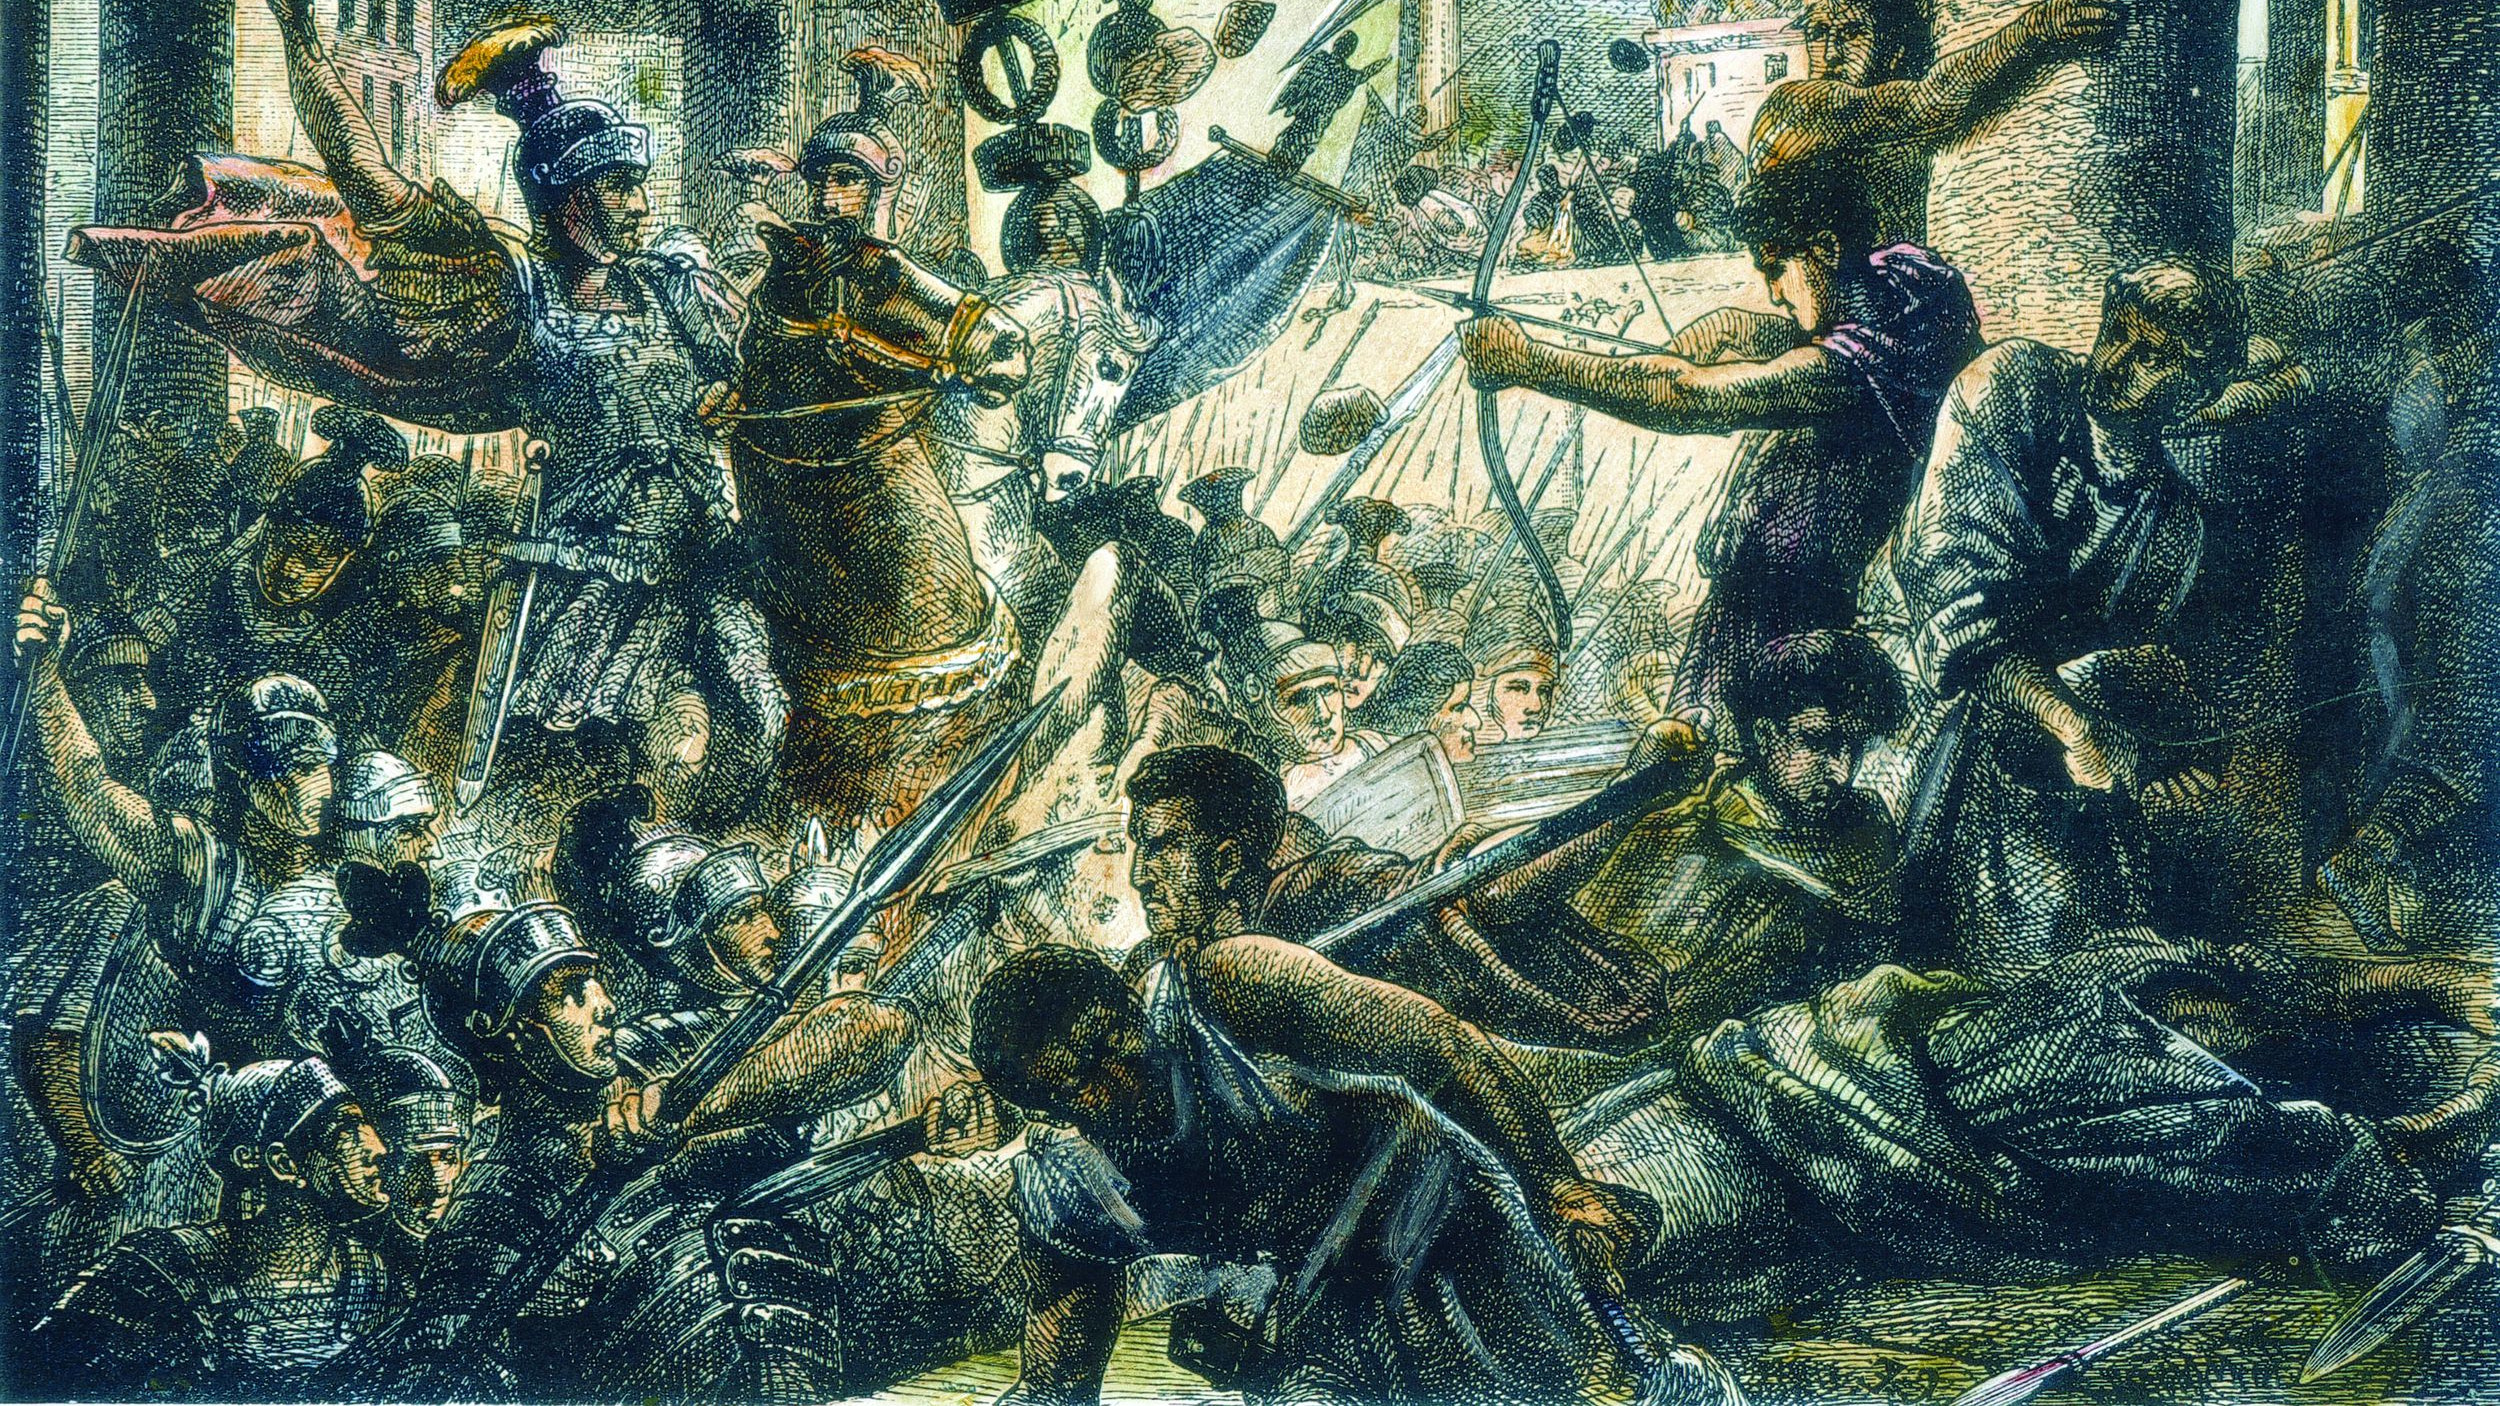 Lucius Cornelius Sulla and his army fight their way into Rome in 82 bc. Sulla’s victory made him a virtual dictator, and he extracted a bloody revenge on his opponents.